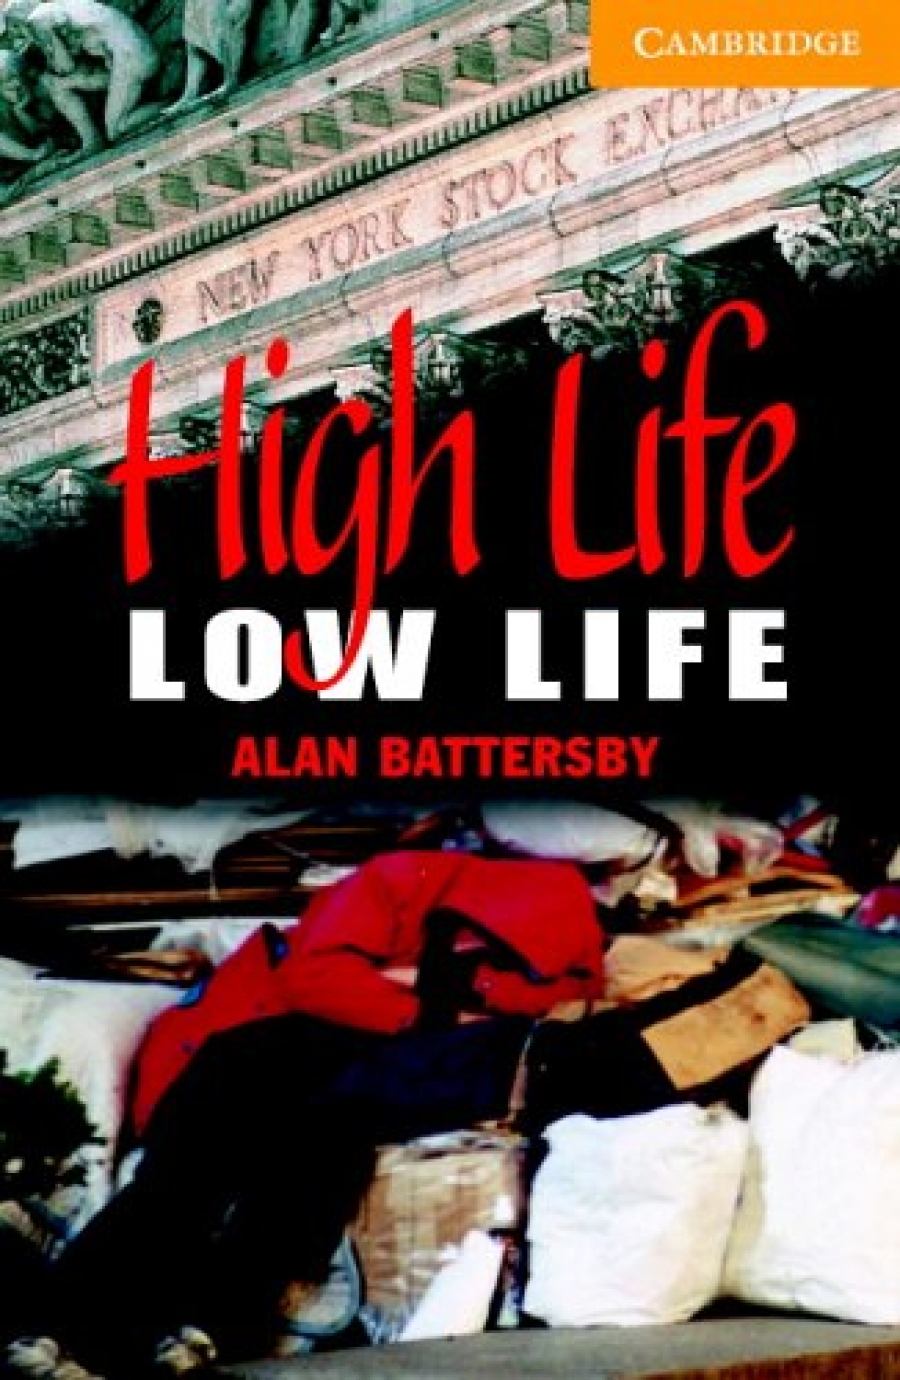 Alan Battersby High Life, Low Life (with Audio CD) 